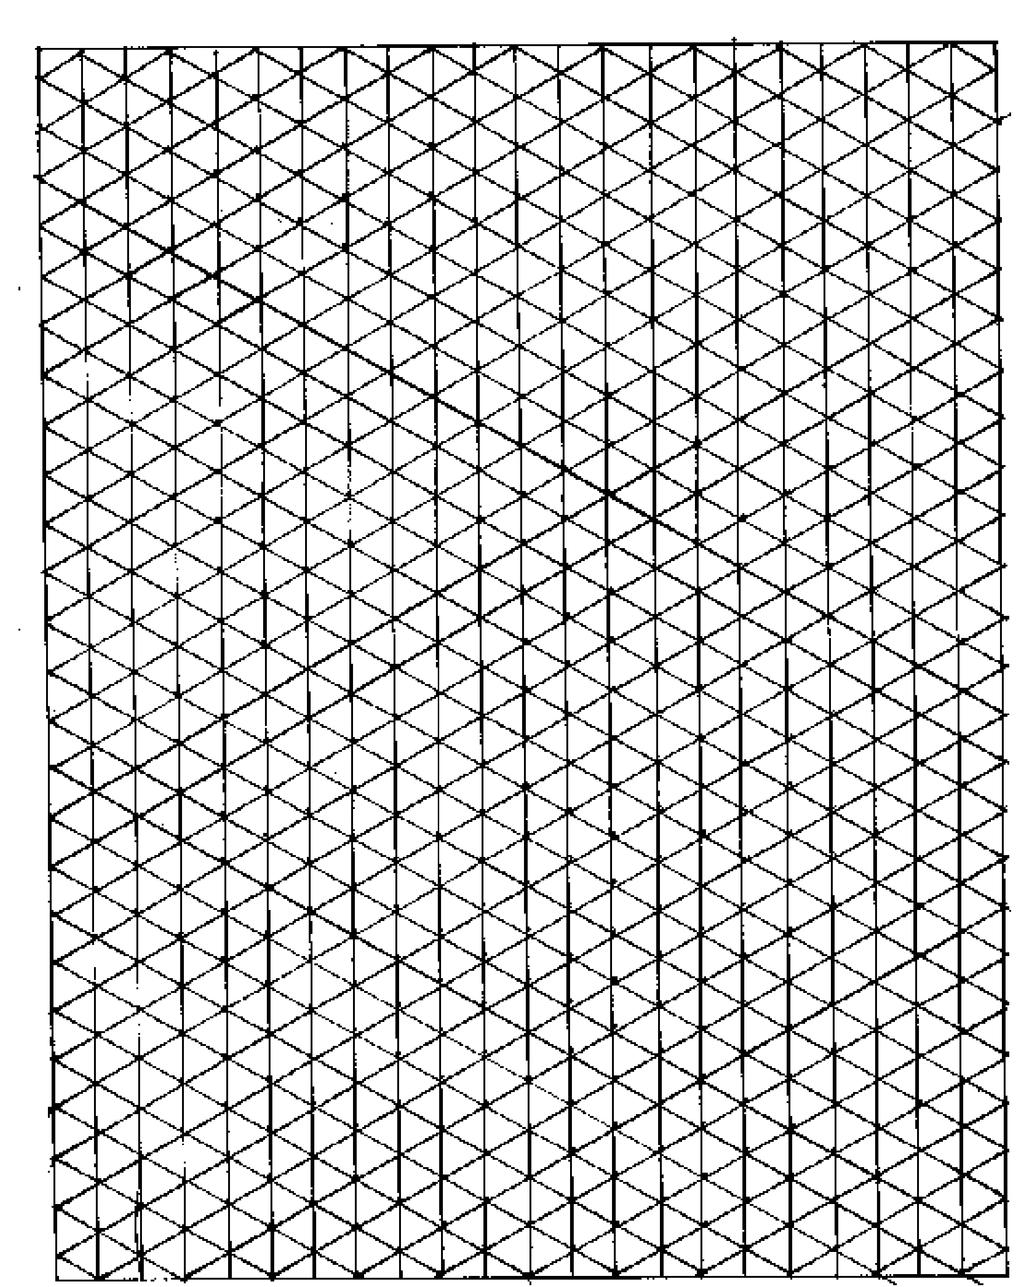 16 Isometric Grid Paper Use this grid